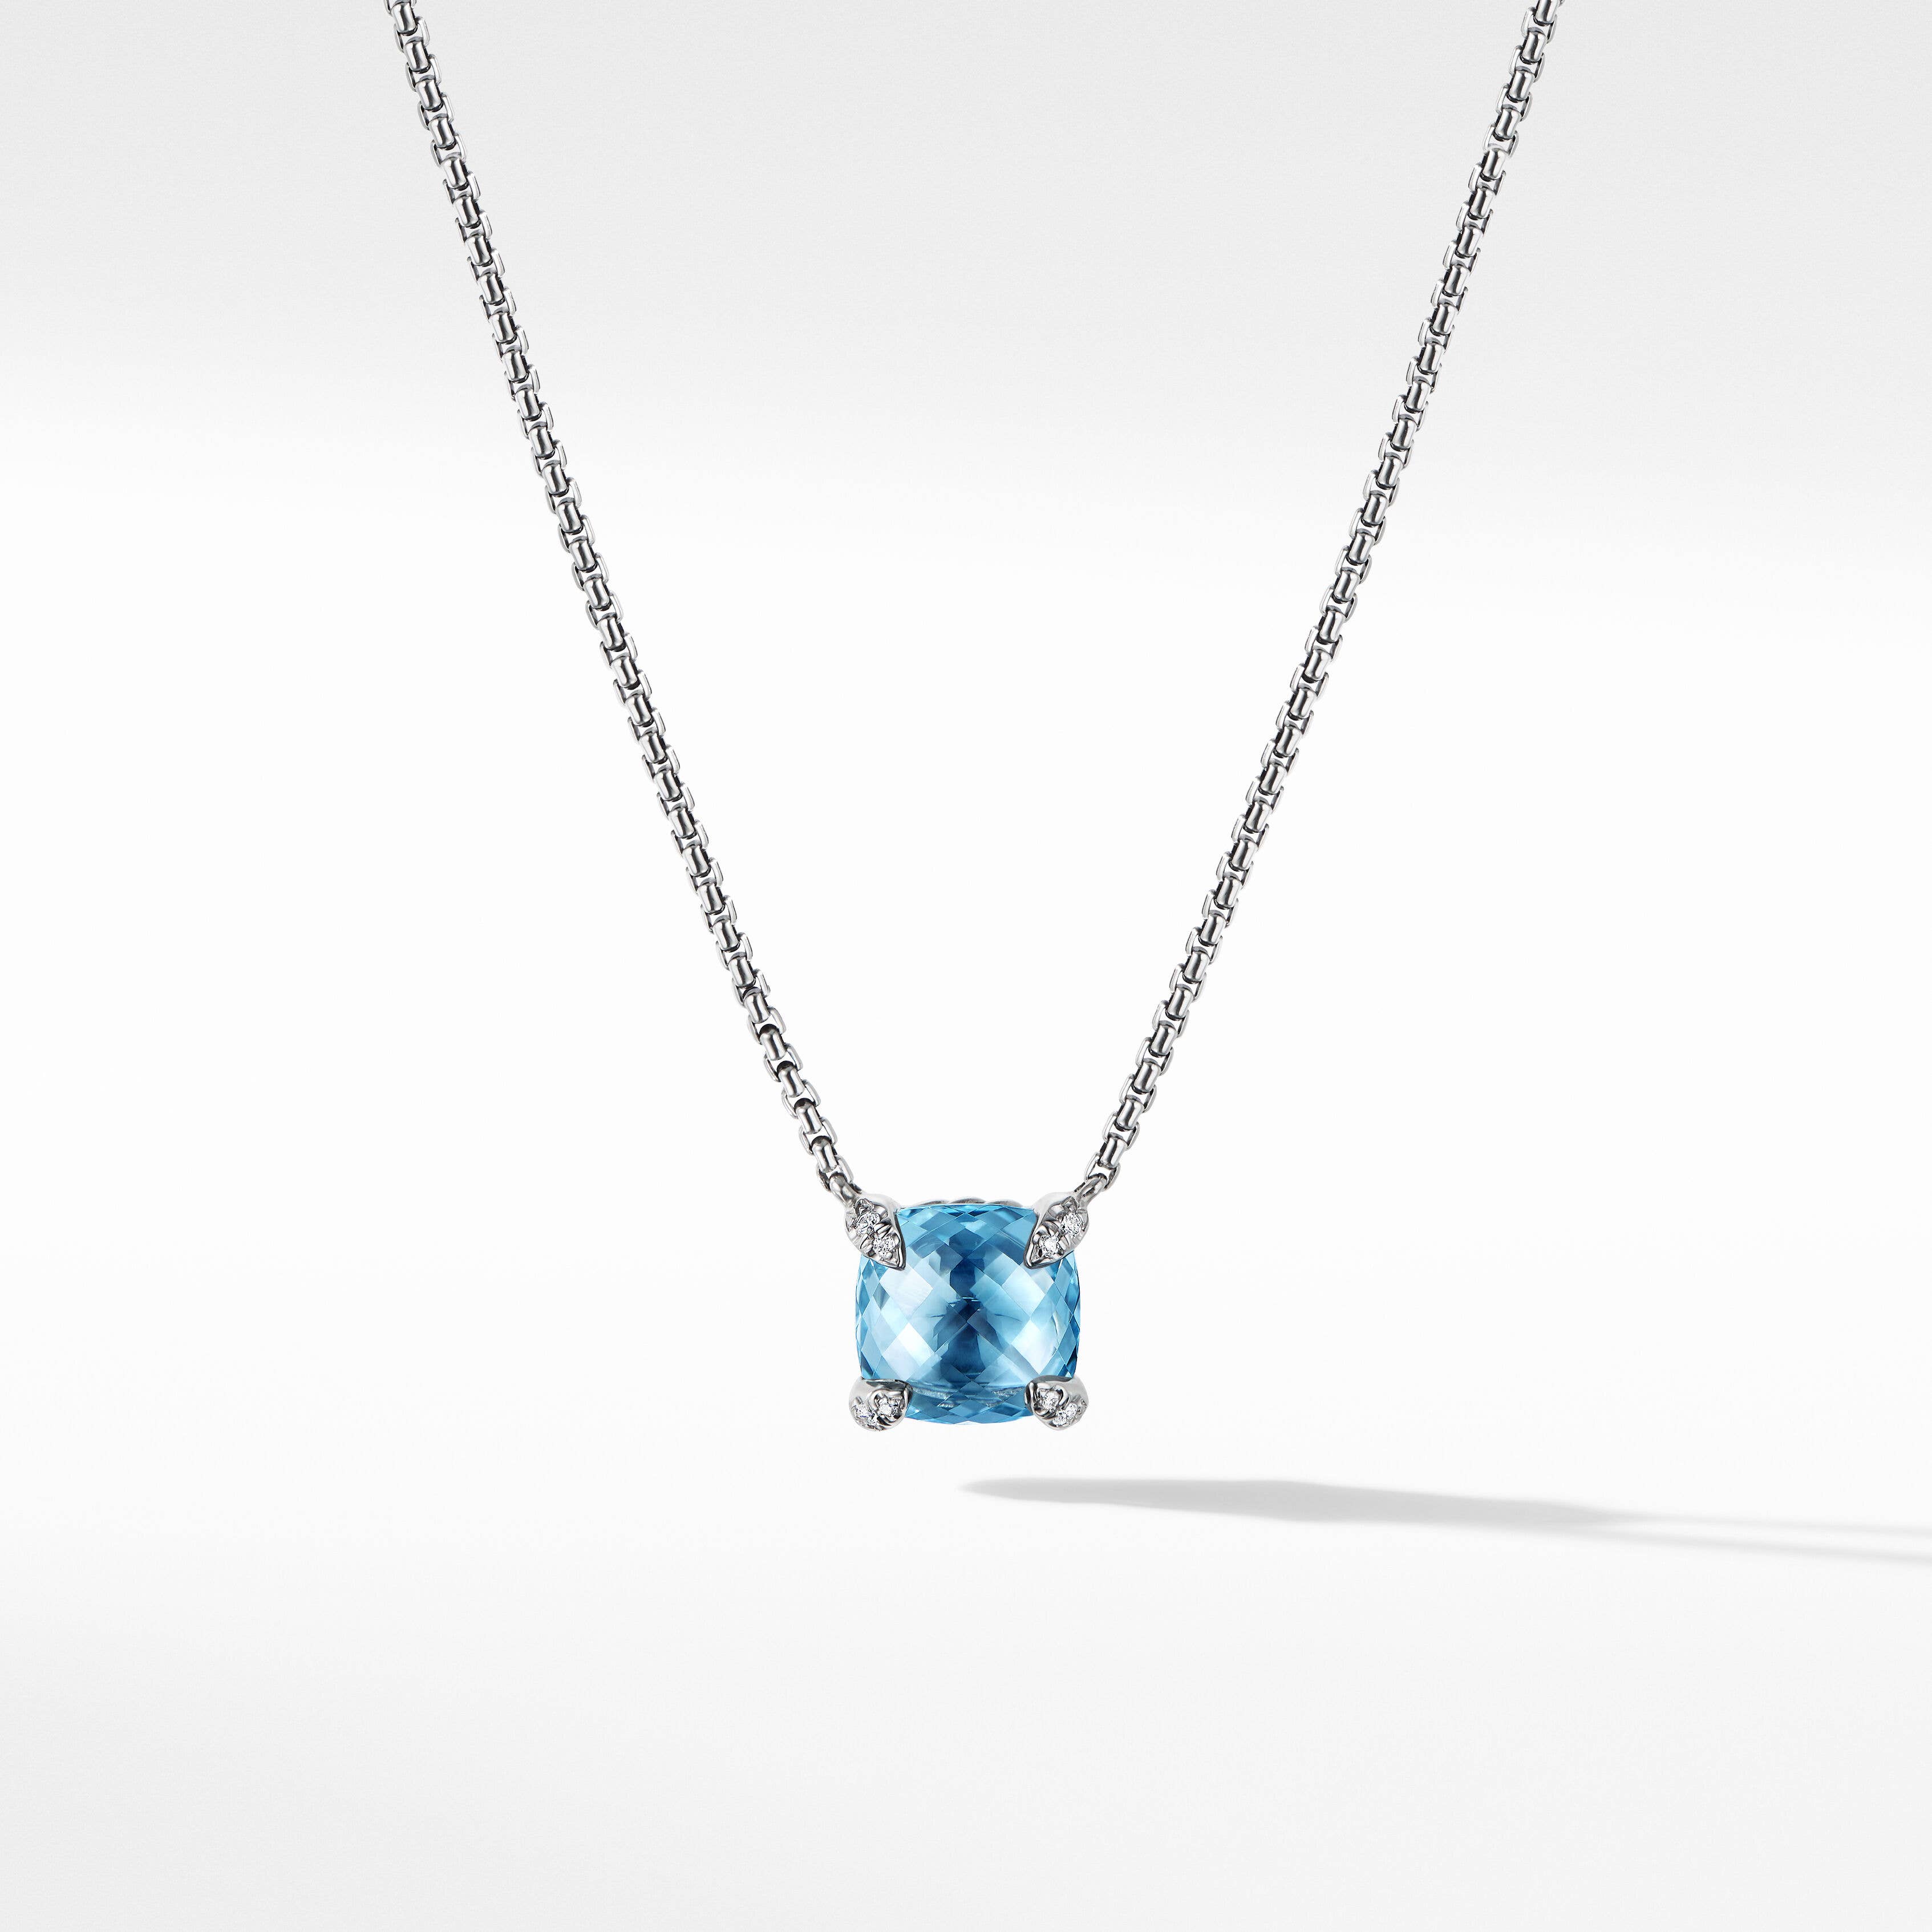 Petite Chatelaine® Pendant Necklace in Sterling Silver with Blue Topaz and Pavé Diamonds